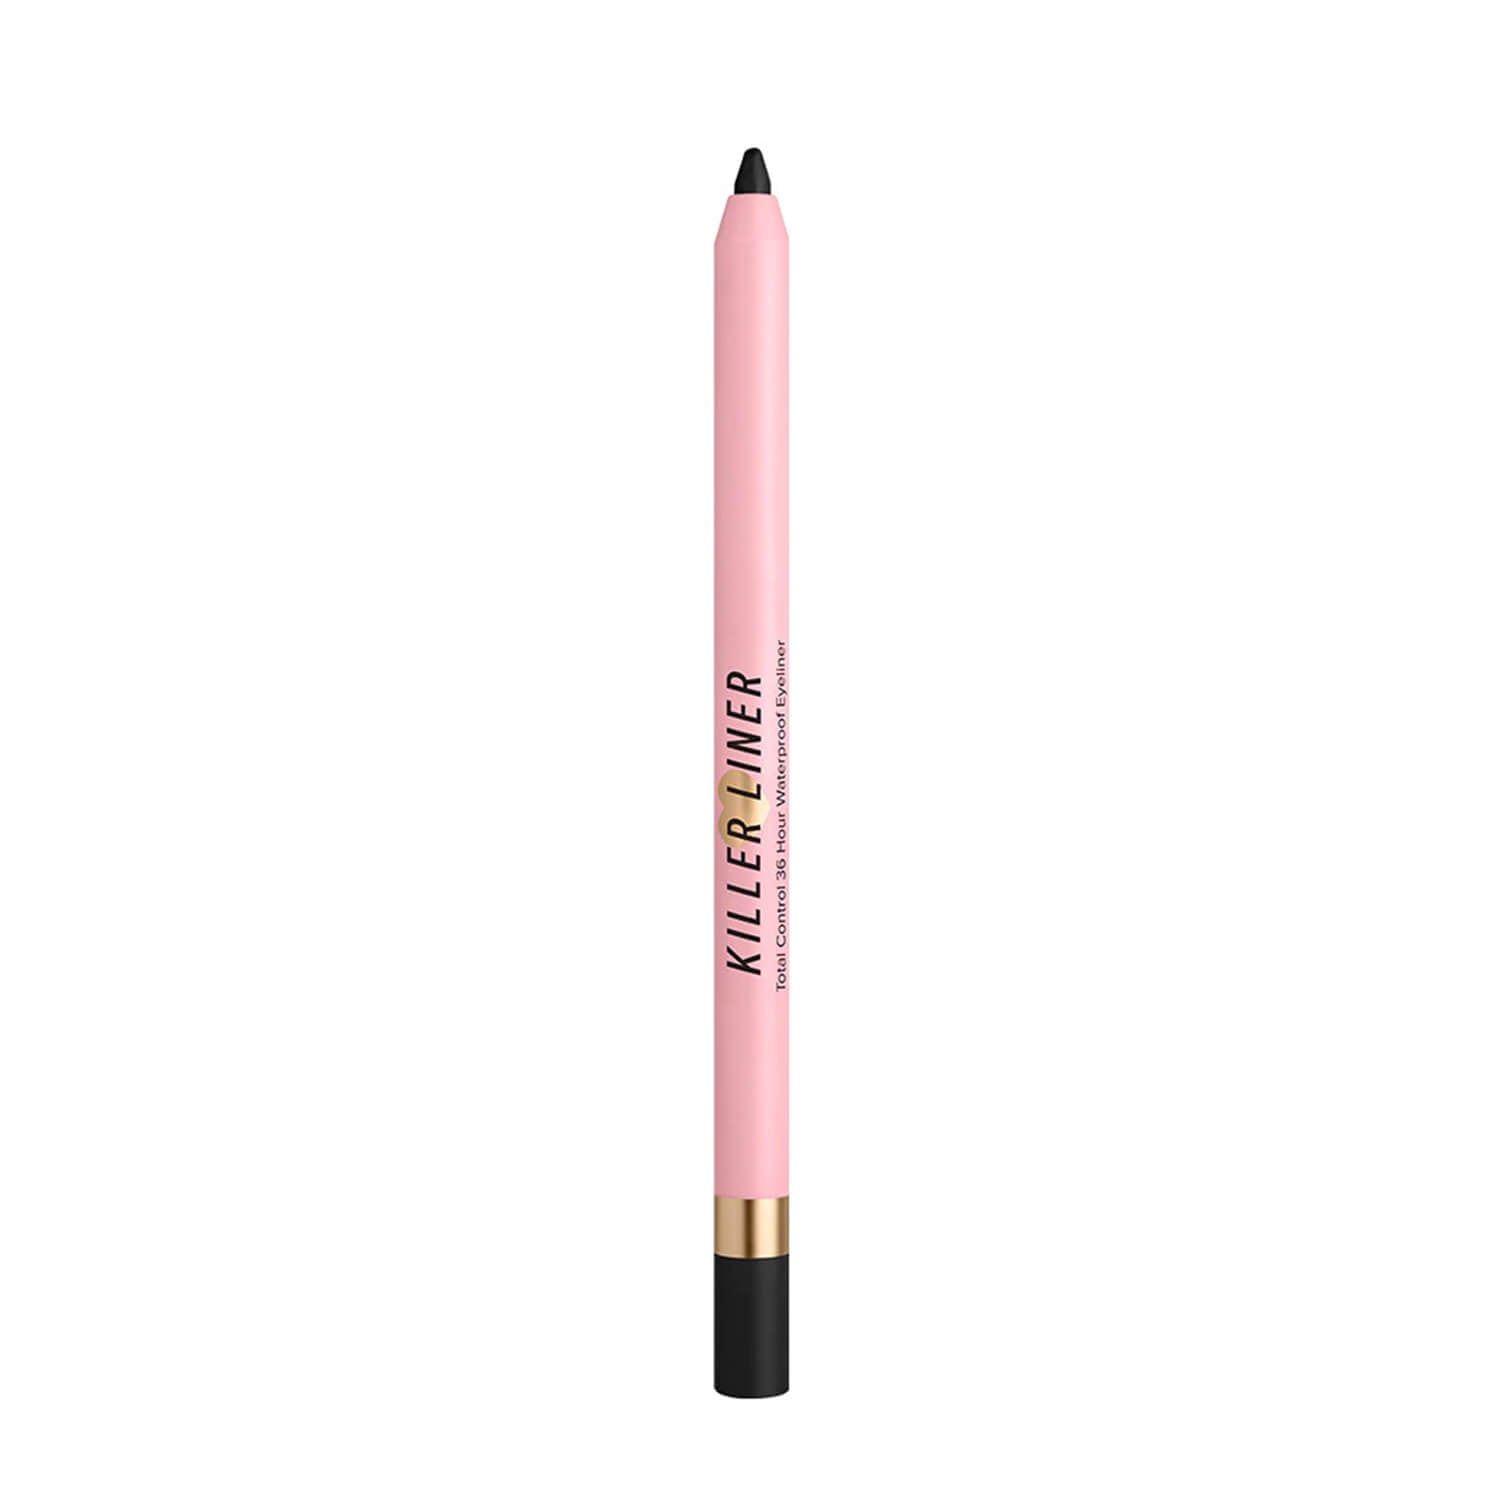 Too Faced Killer Liner Gel Eyeliner Pencil available at Heygirl.pk for delivery in Karachi, Lahore, Islamabad across Pakistan. 